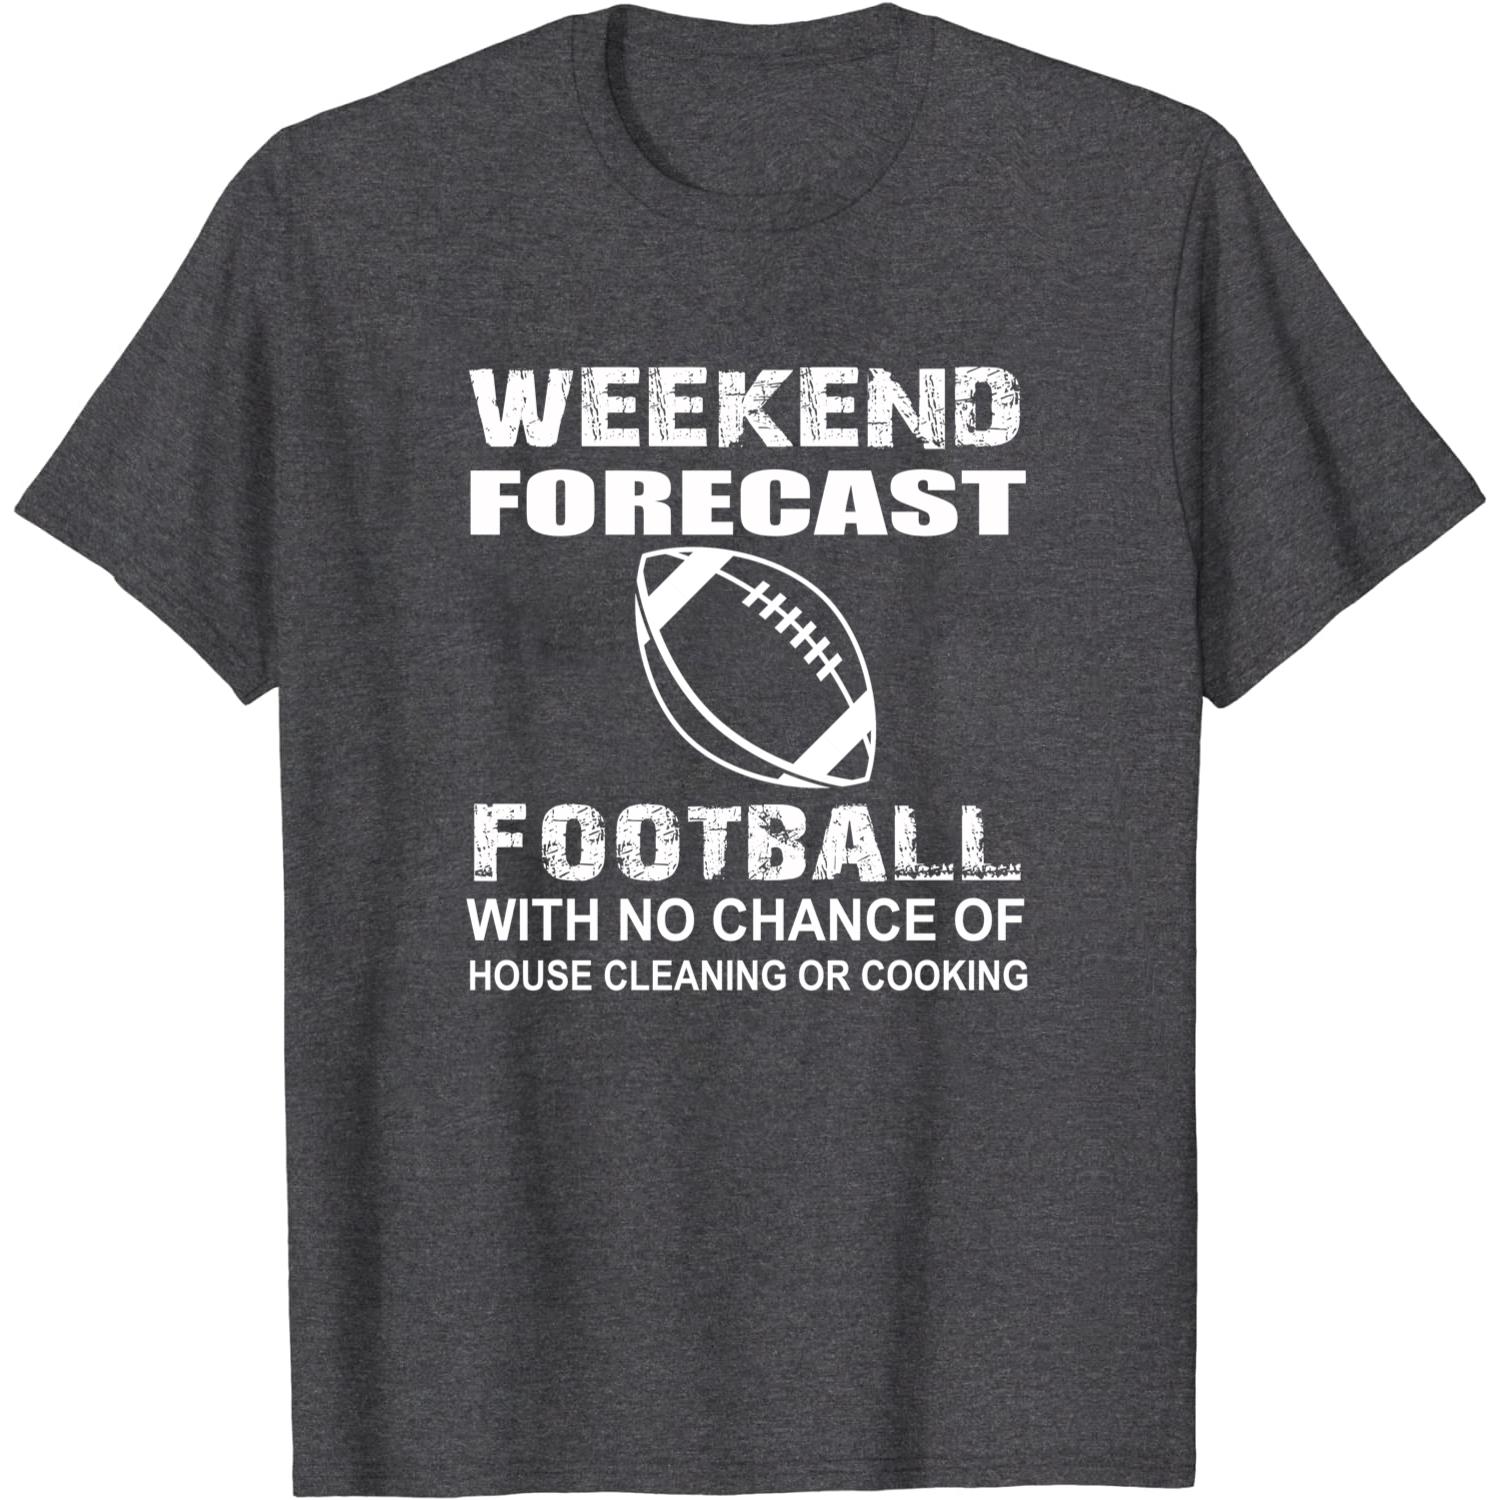 weekend forecast football With No Chance Of House Cleaning Or Cooking unisex T-Shirt Long Sleeve T-Shirt  Hoodie Sweatshirt